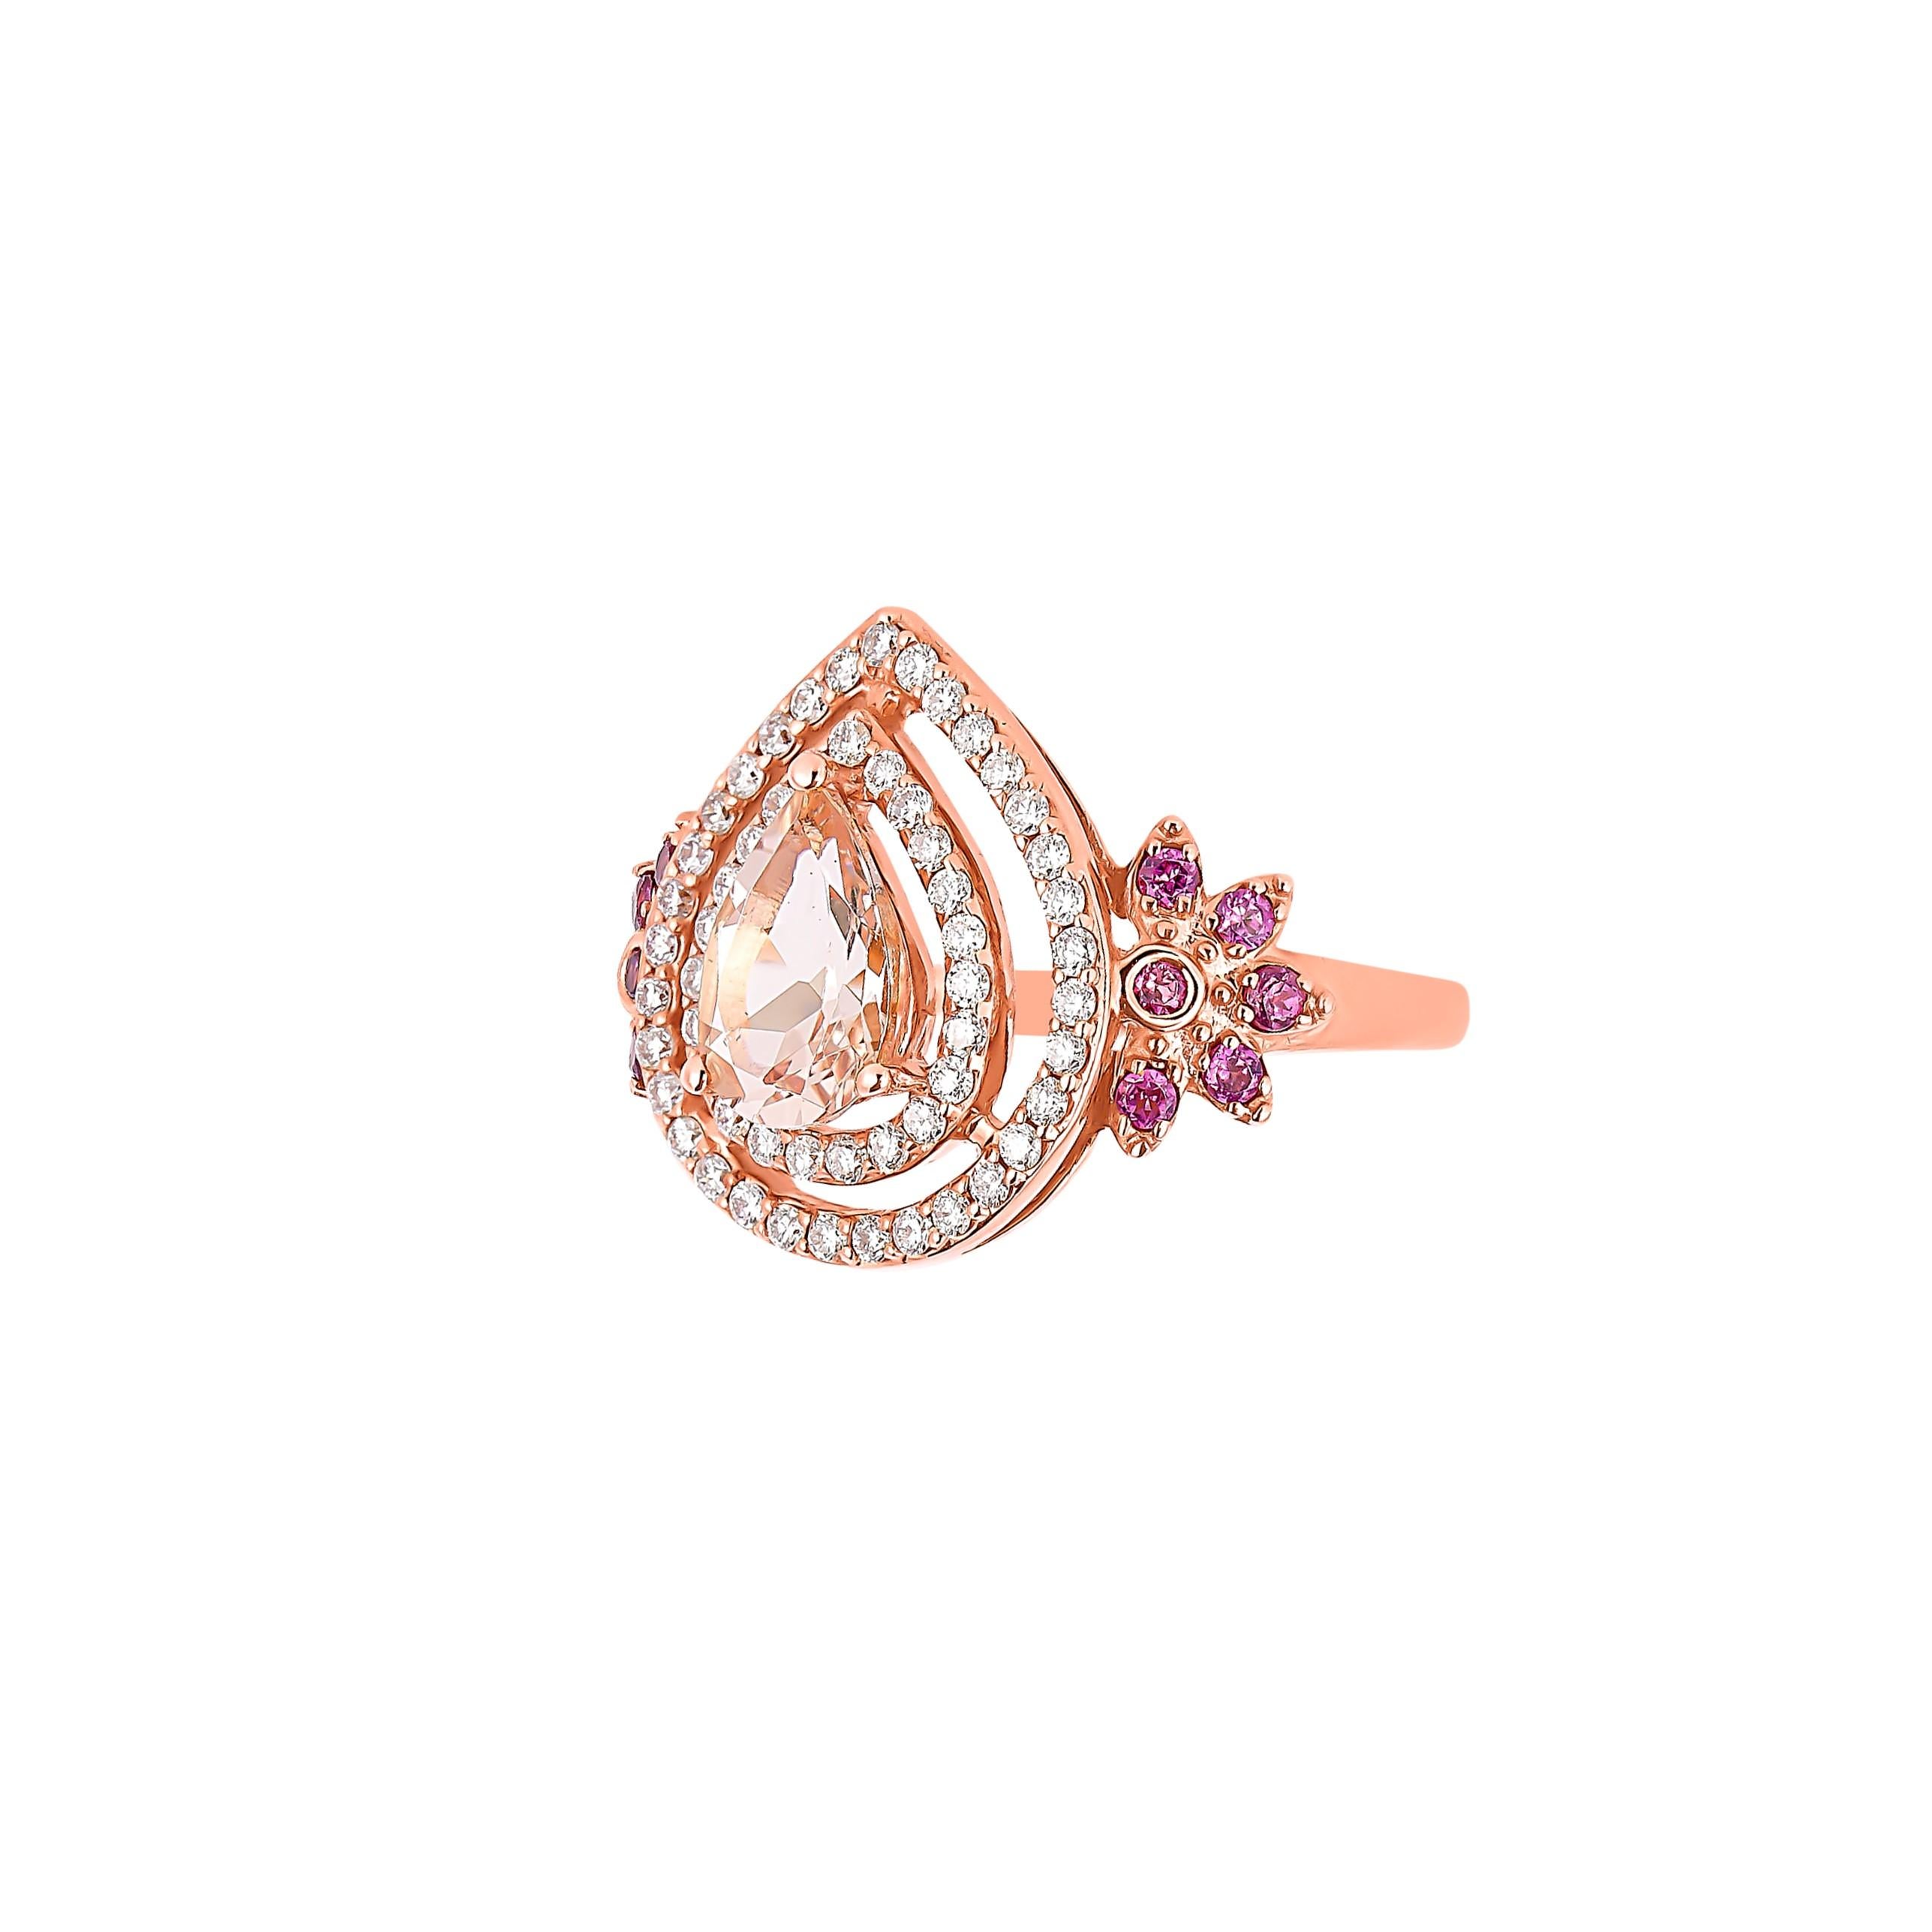 Contemporary 1.2 Carat Morganite with Rhodolite and Diamond Ring in 18 Karat Rose Gold For Sale